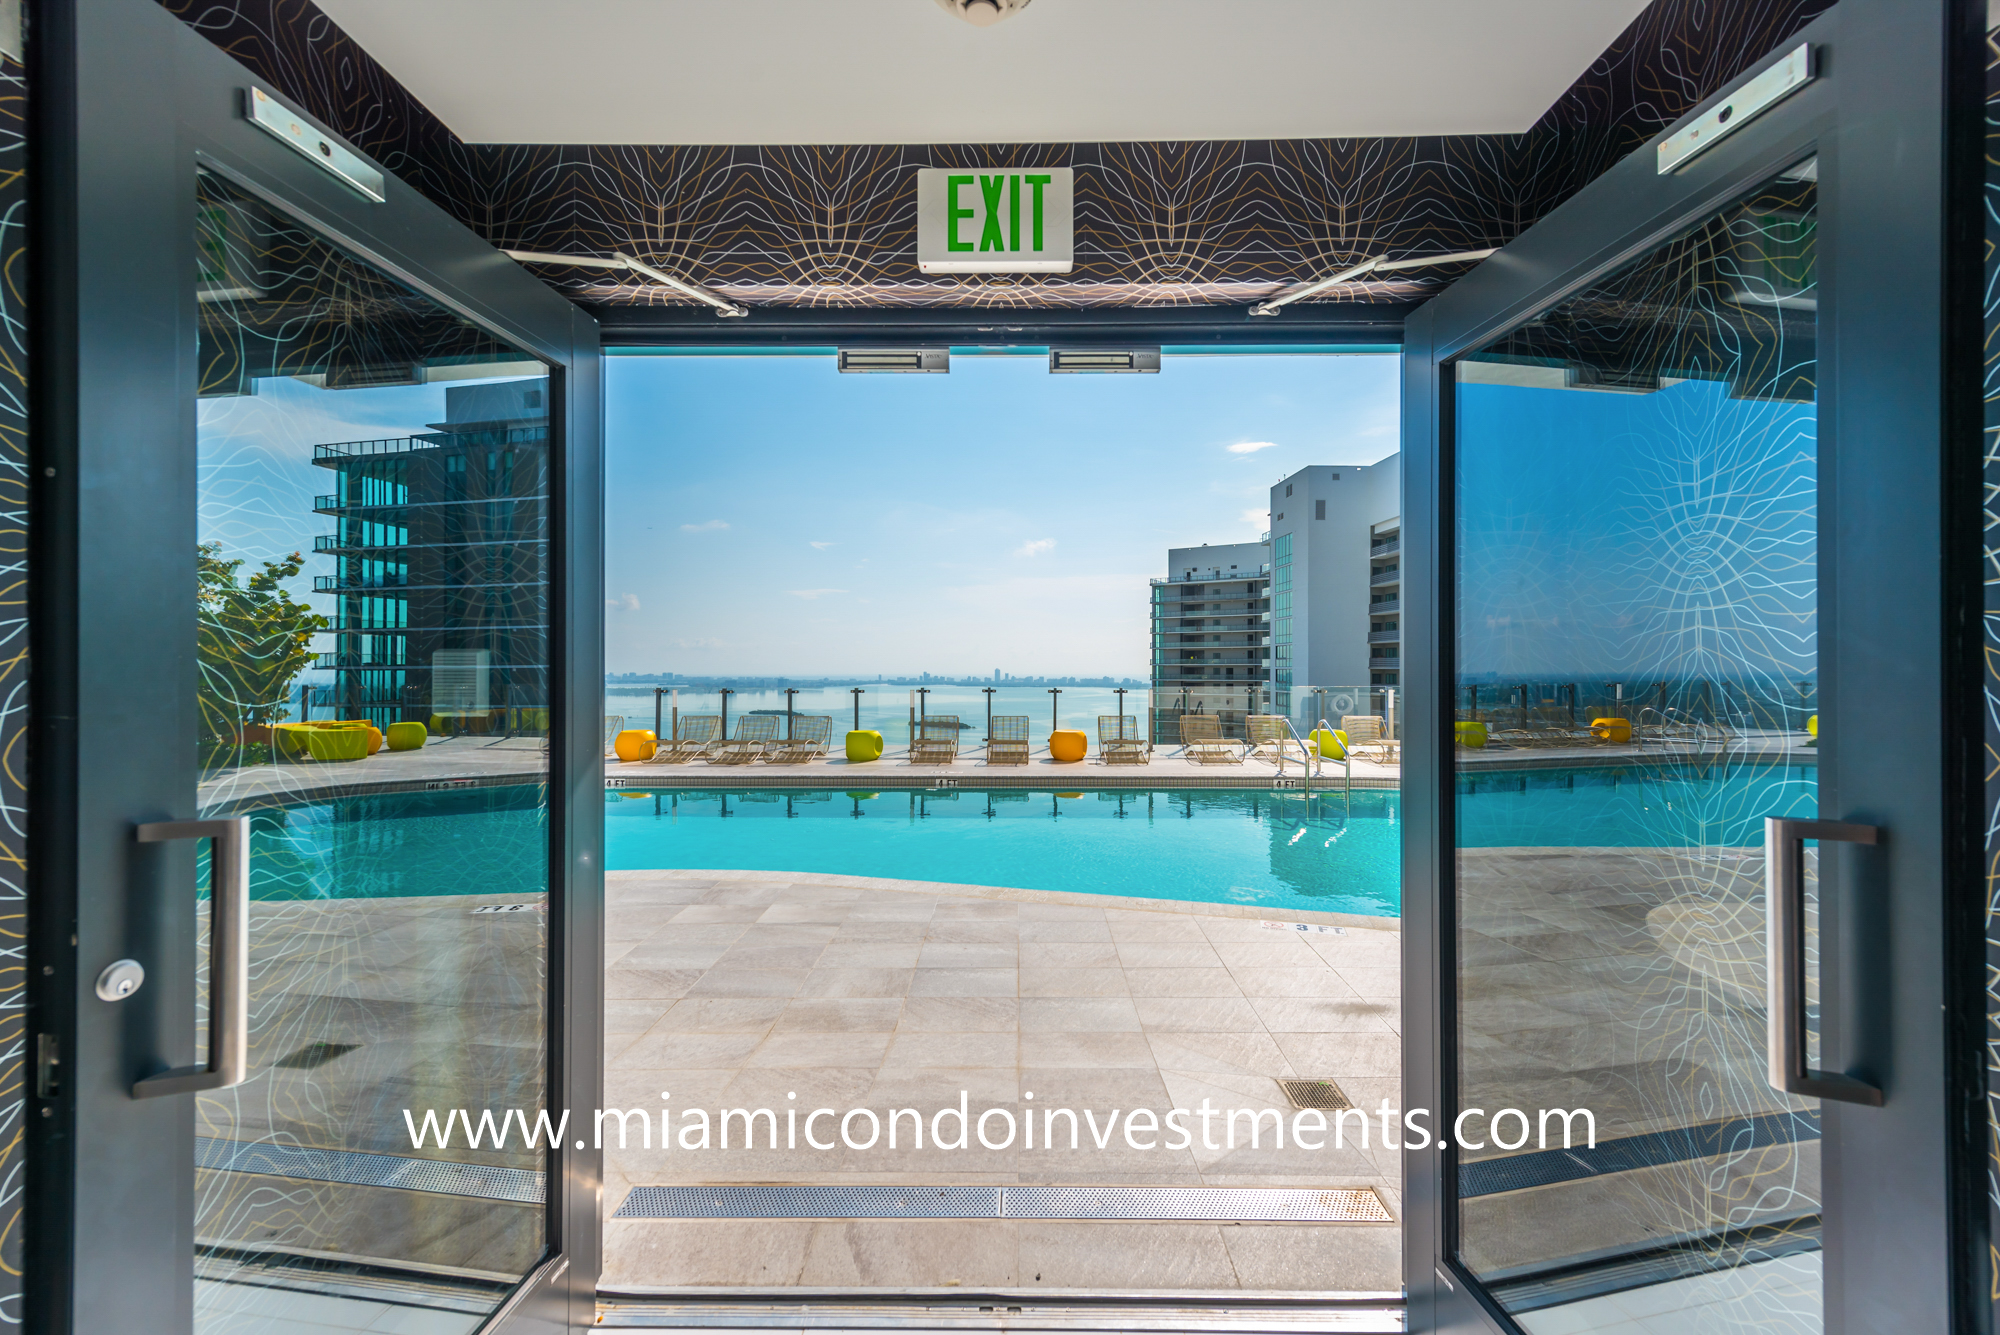 entrance to rooftop pool deck